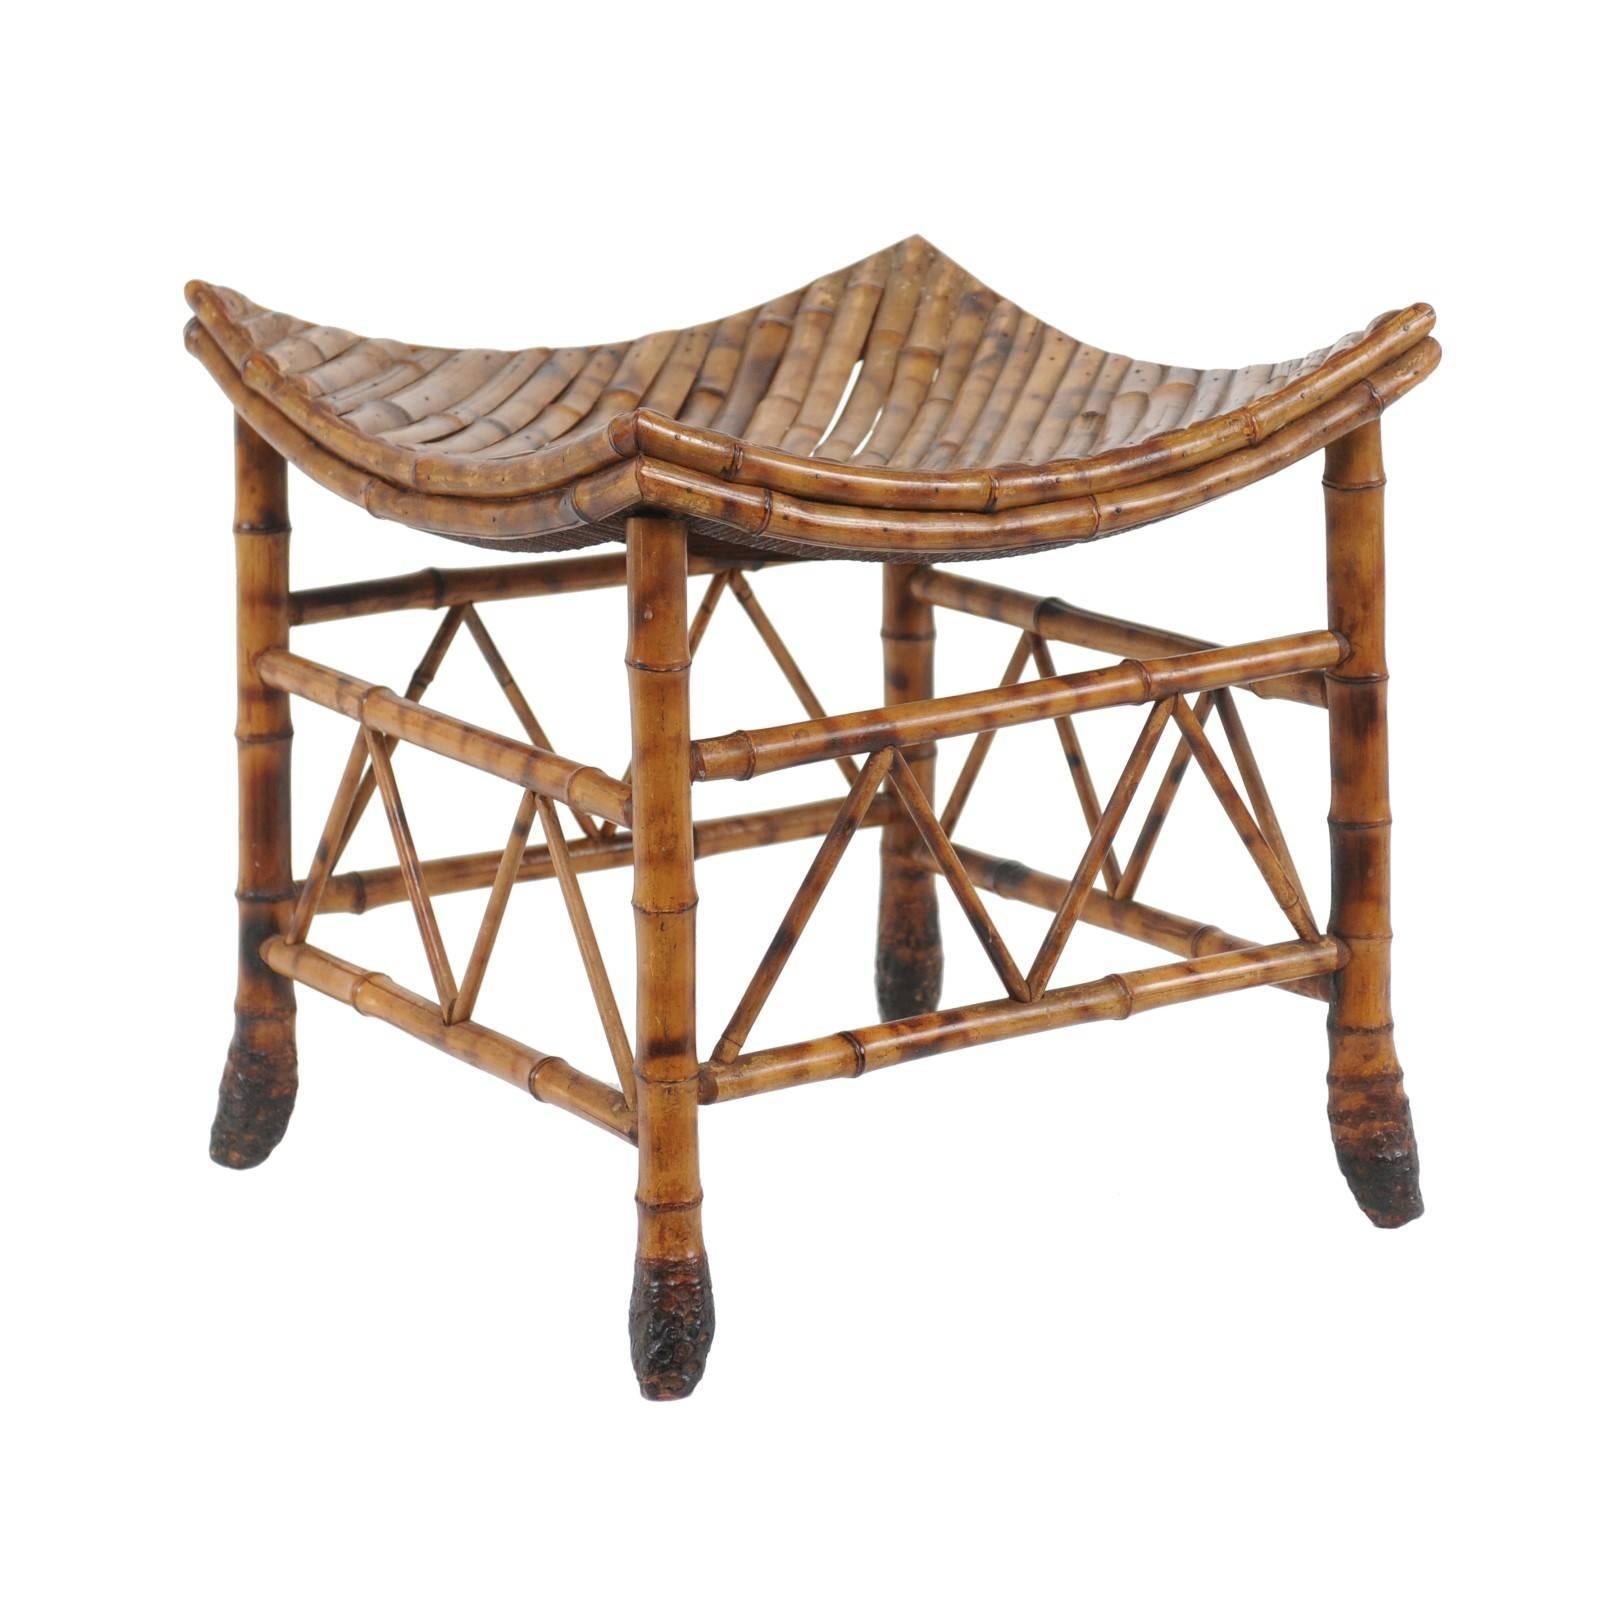 Egyptian Revival Thebes Bamboo Stool from Early 20th Century, England